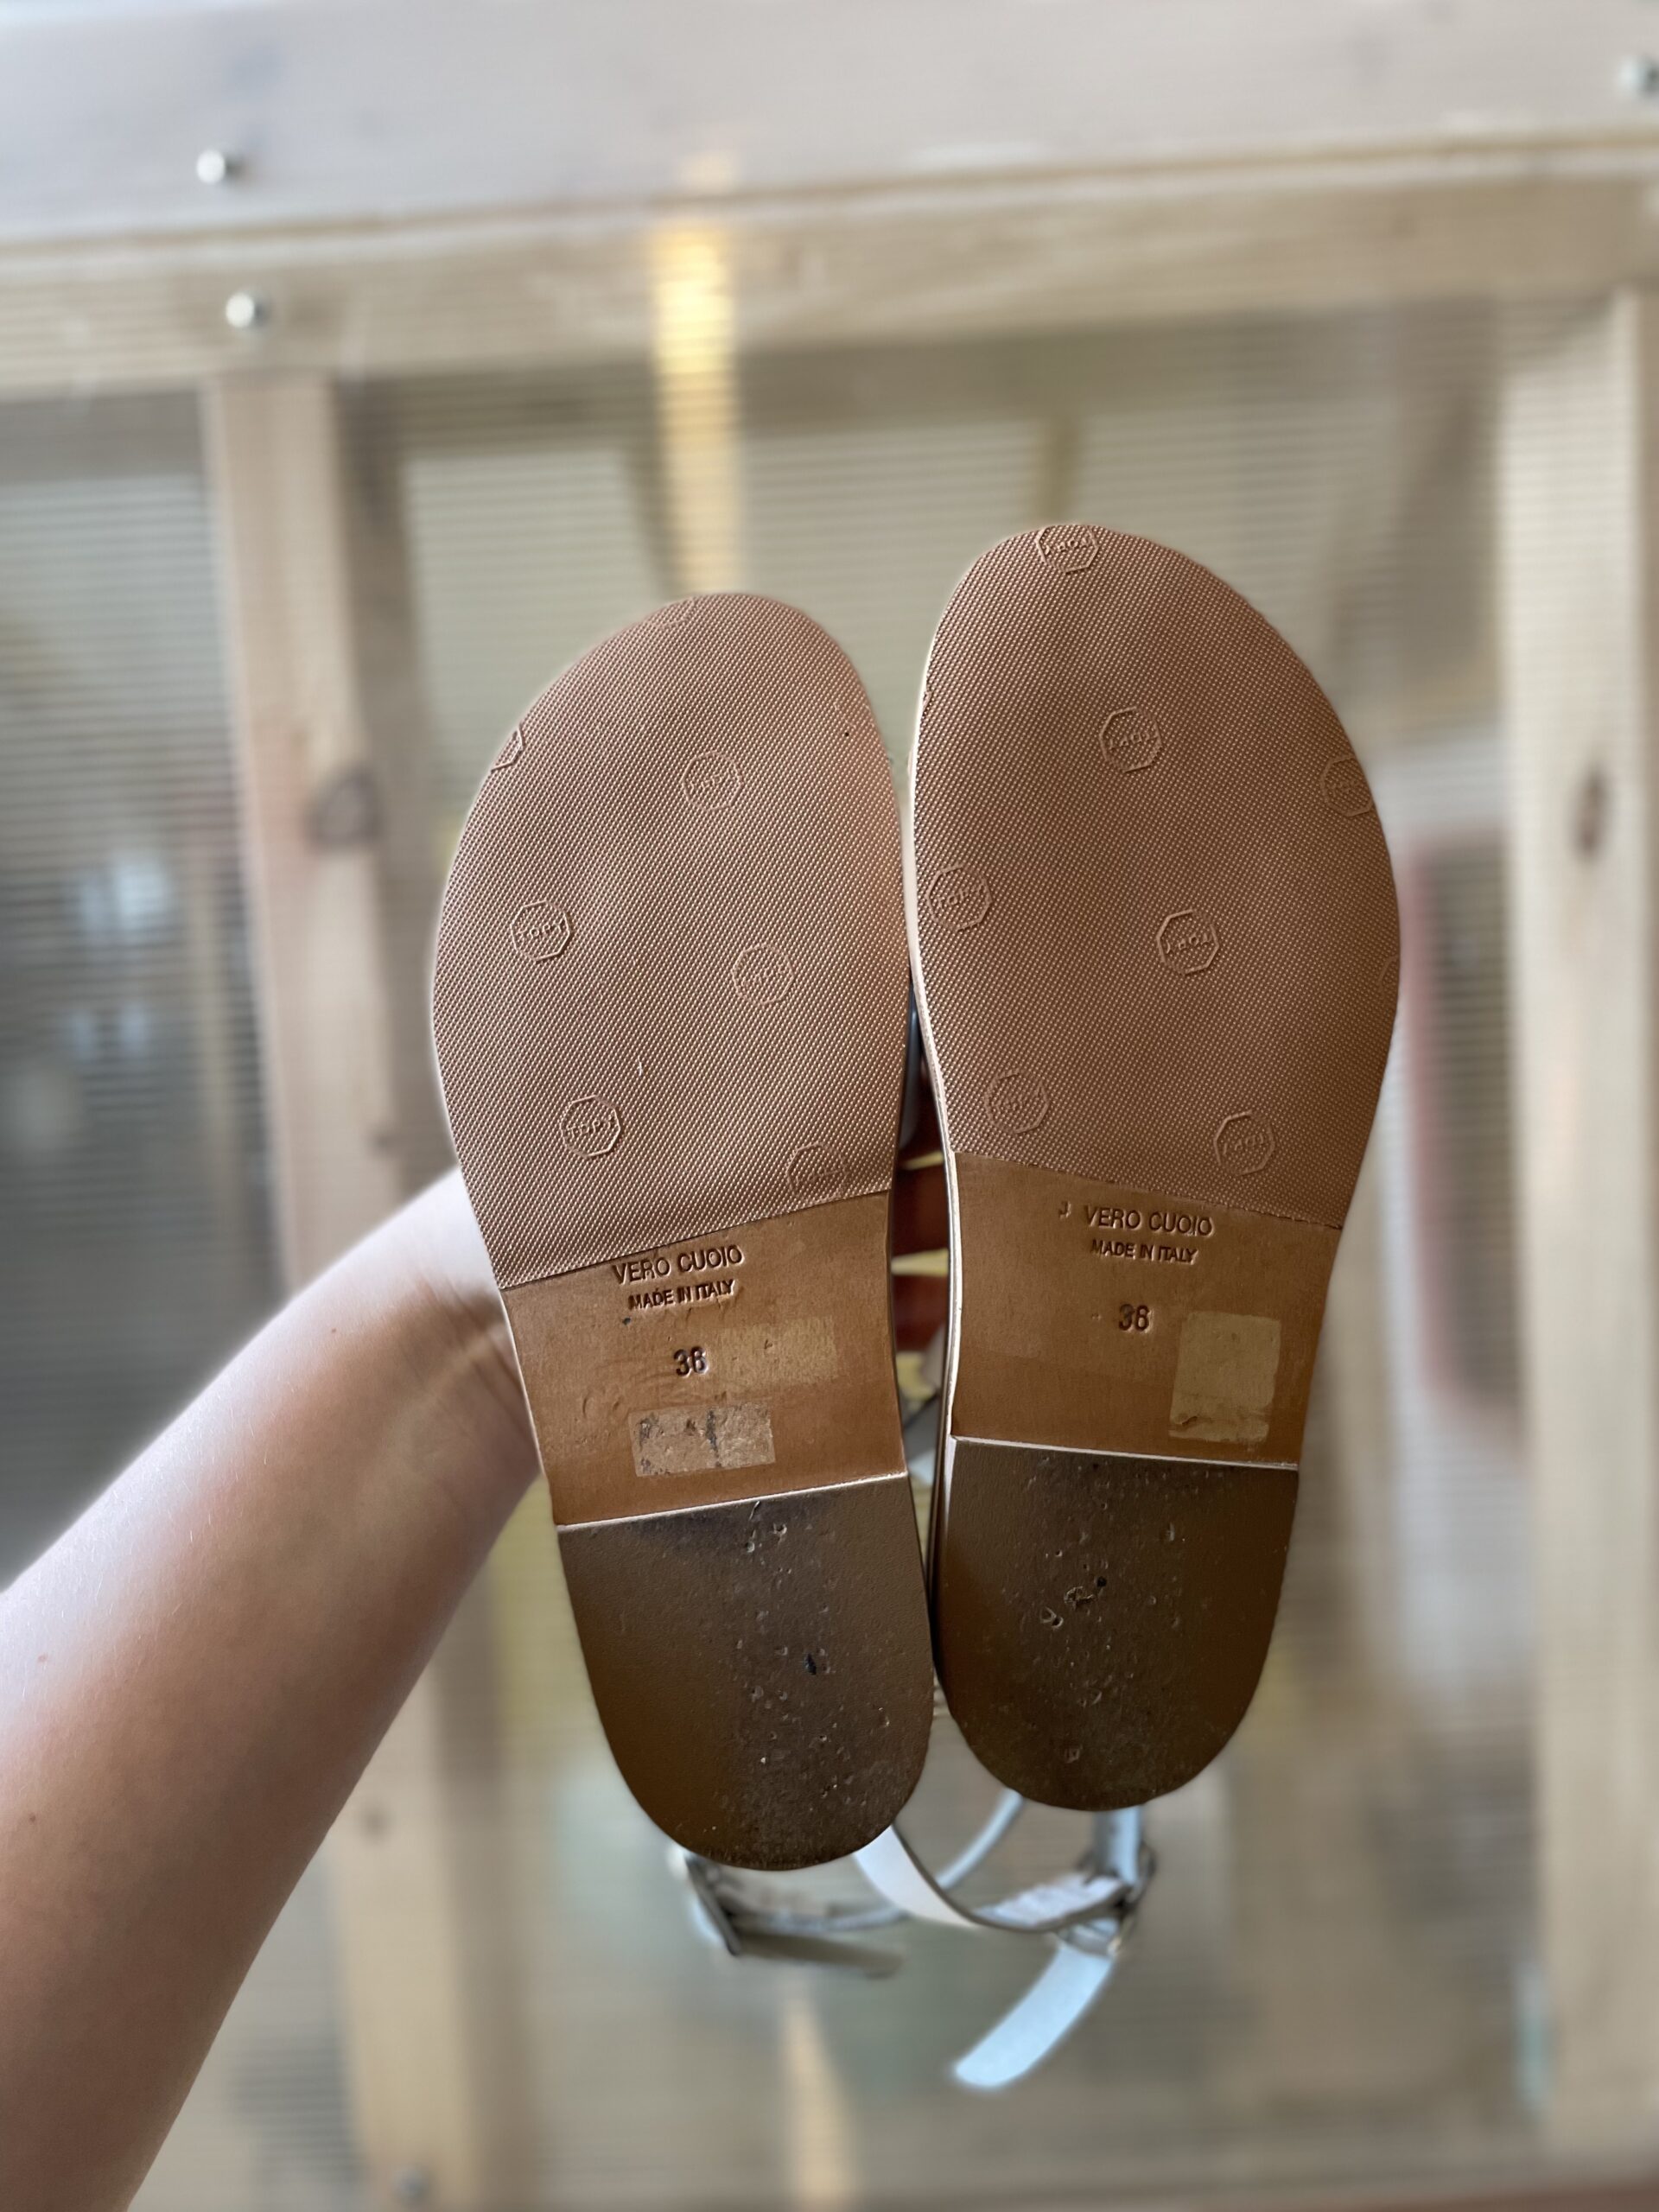 A pair of sandals, with the soles facing outwards, showing topy halfsoles